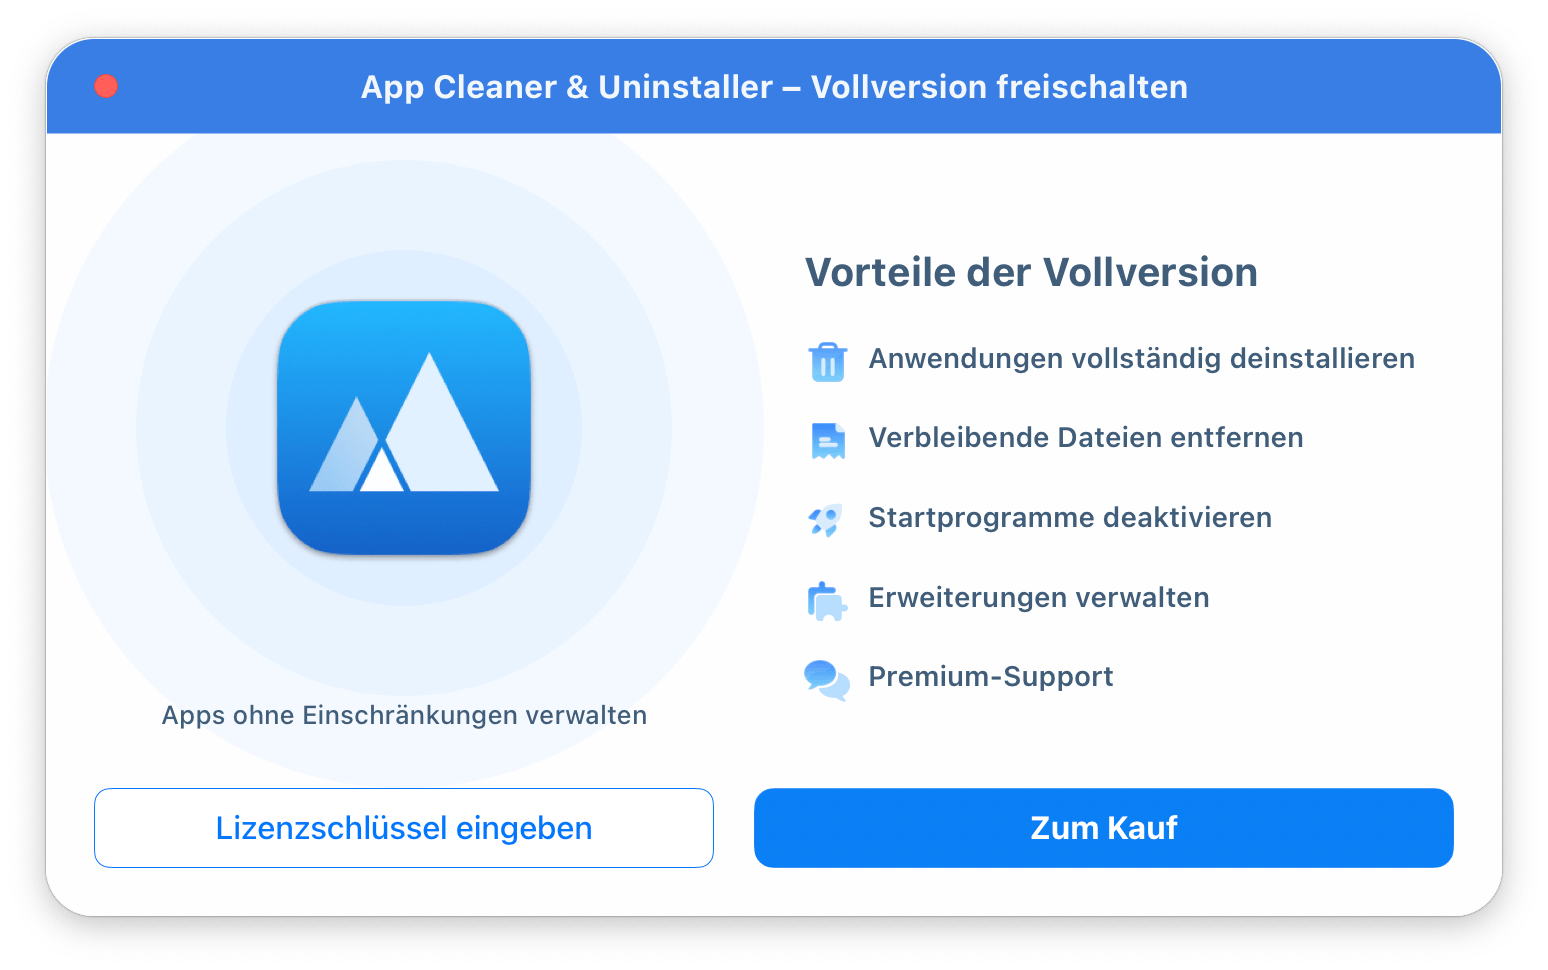 app cleaner uninstaller popup with the benefits of Full version